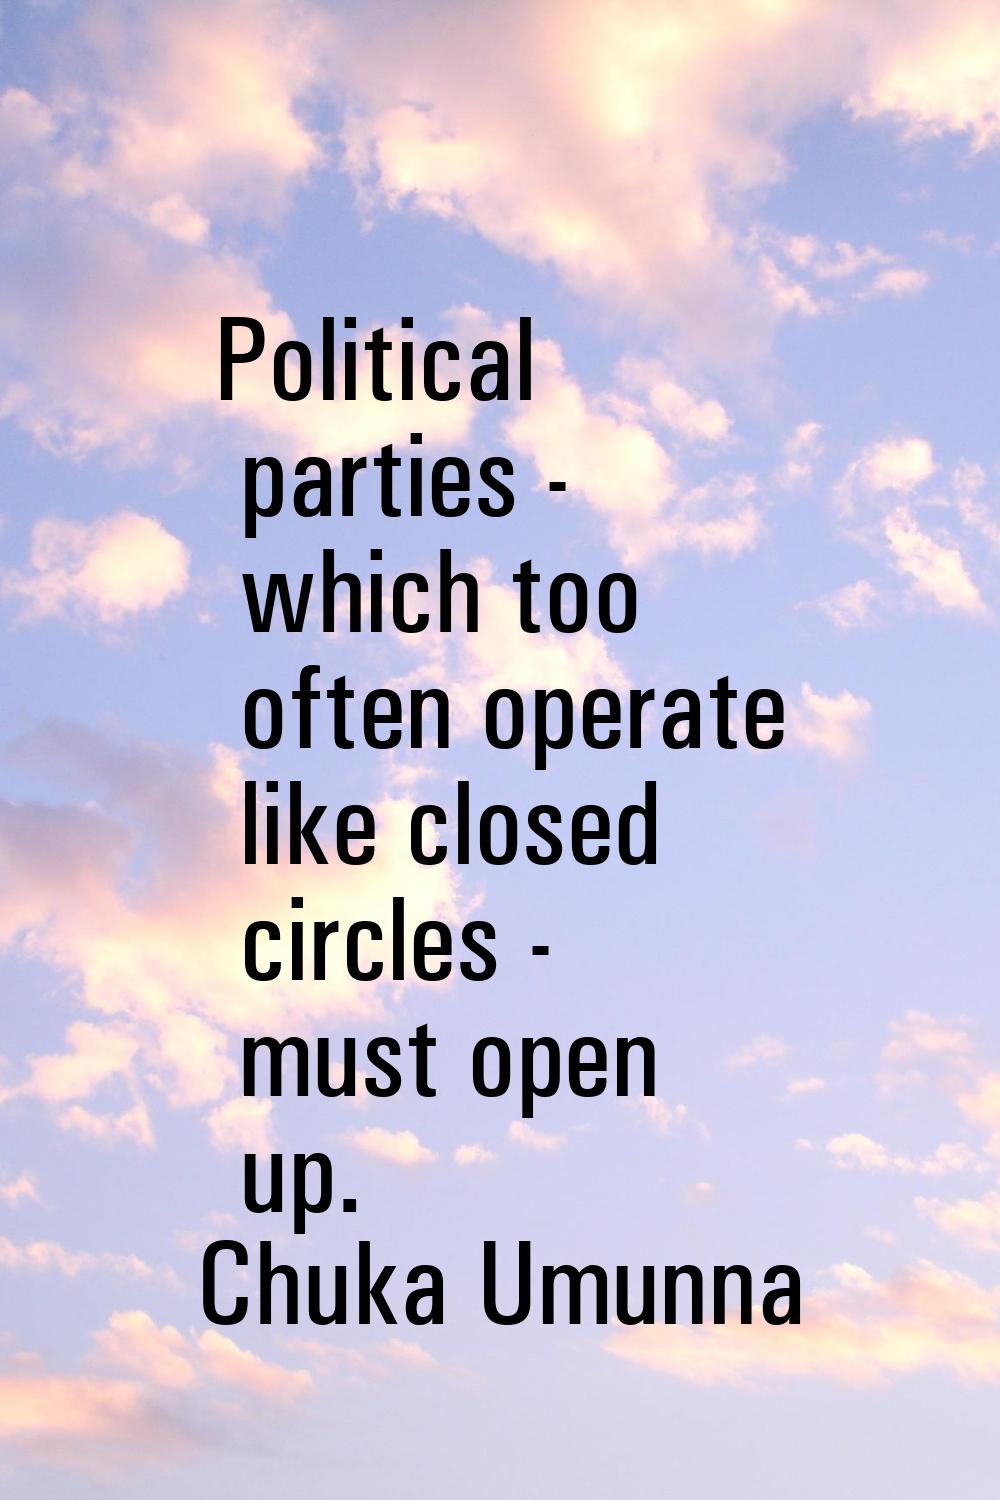 Political parties - which too often operate like closed circles - must open up.